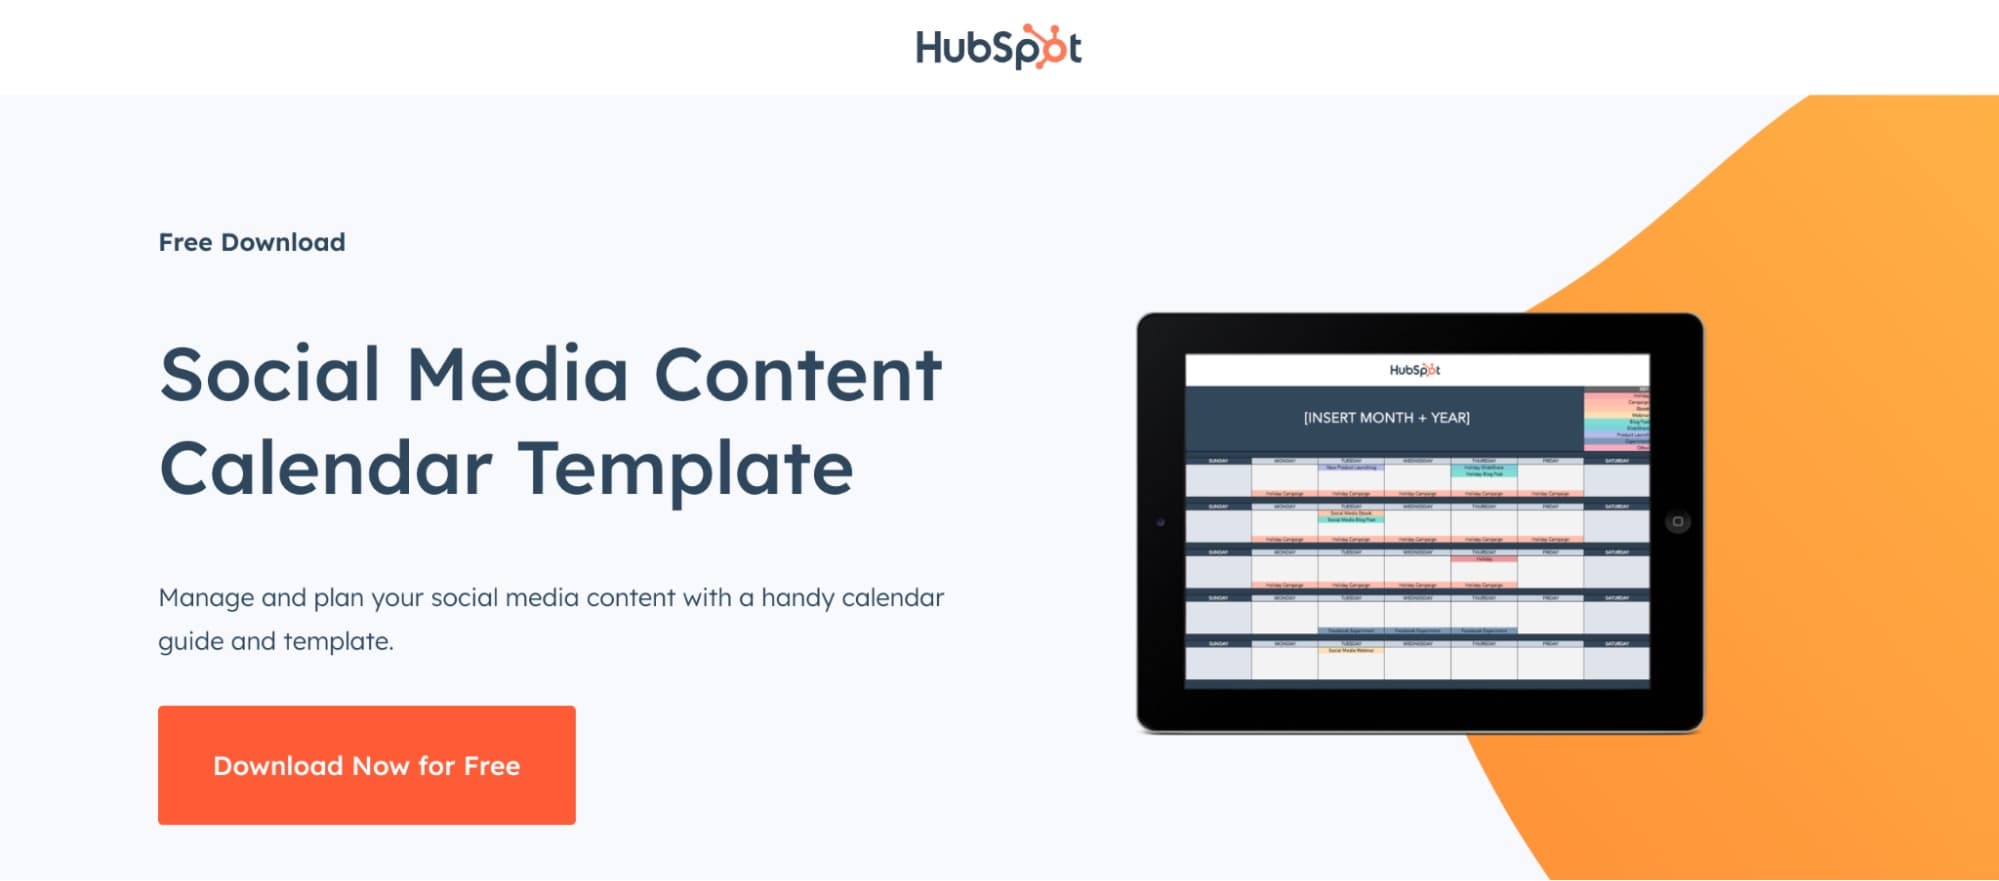 A landing page for HubSpot’s Social Media Content Calendar Template which is used for email lead generation.